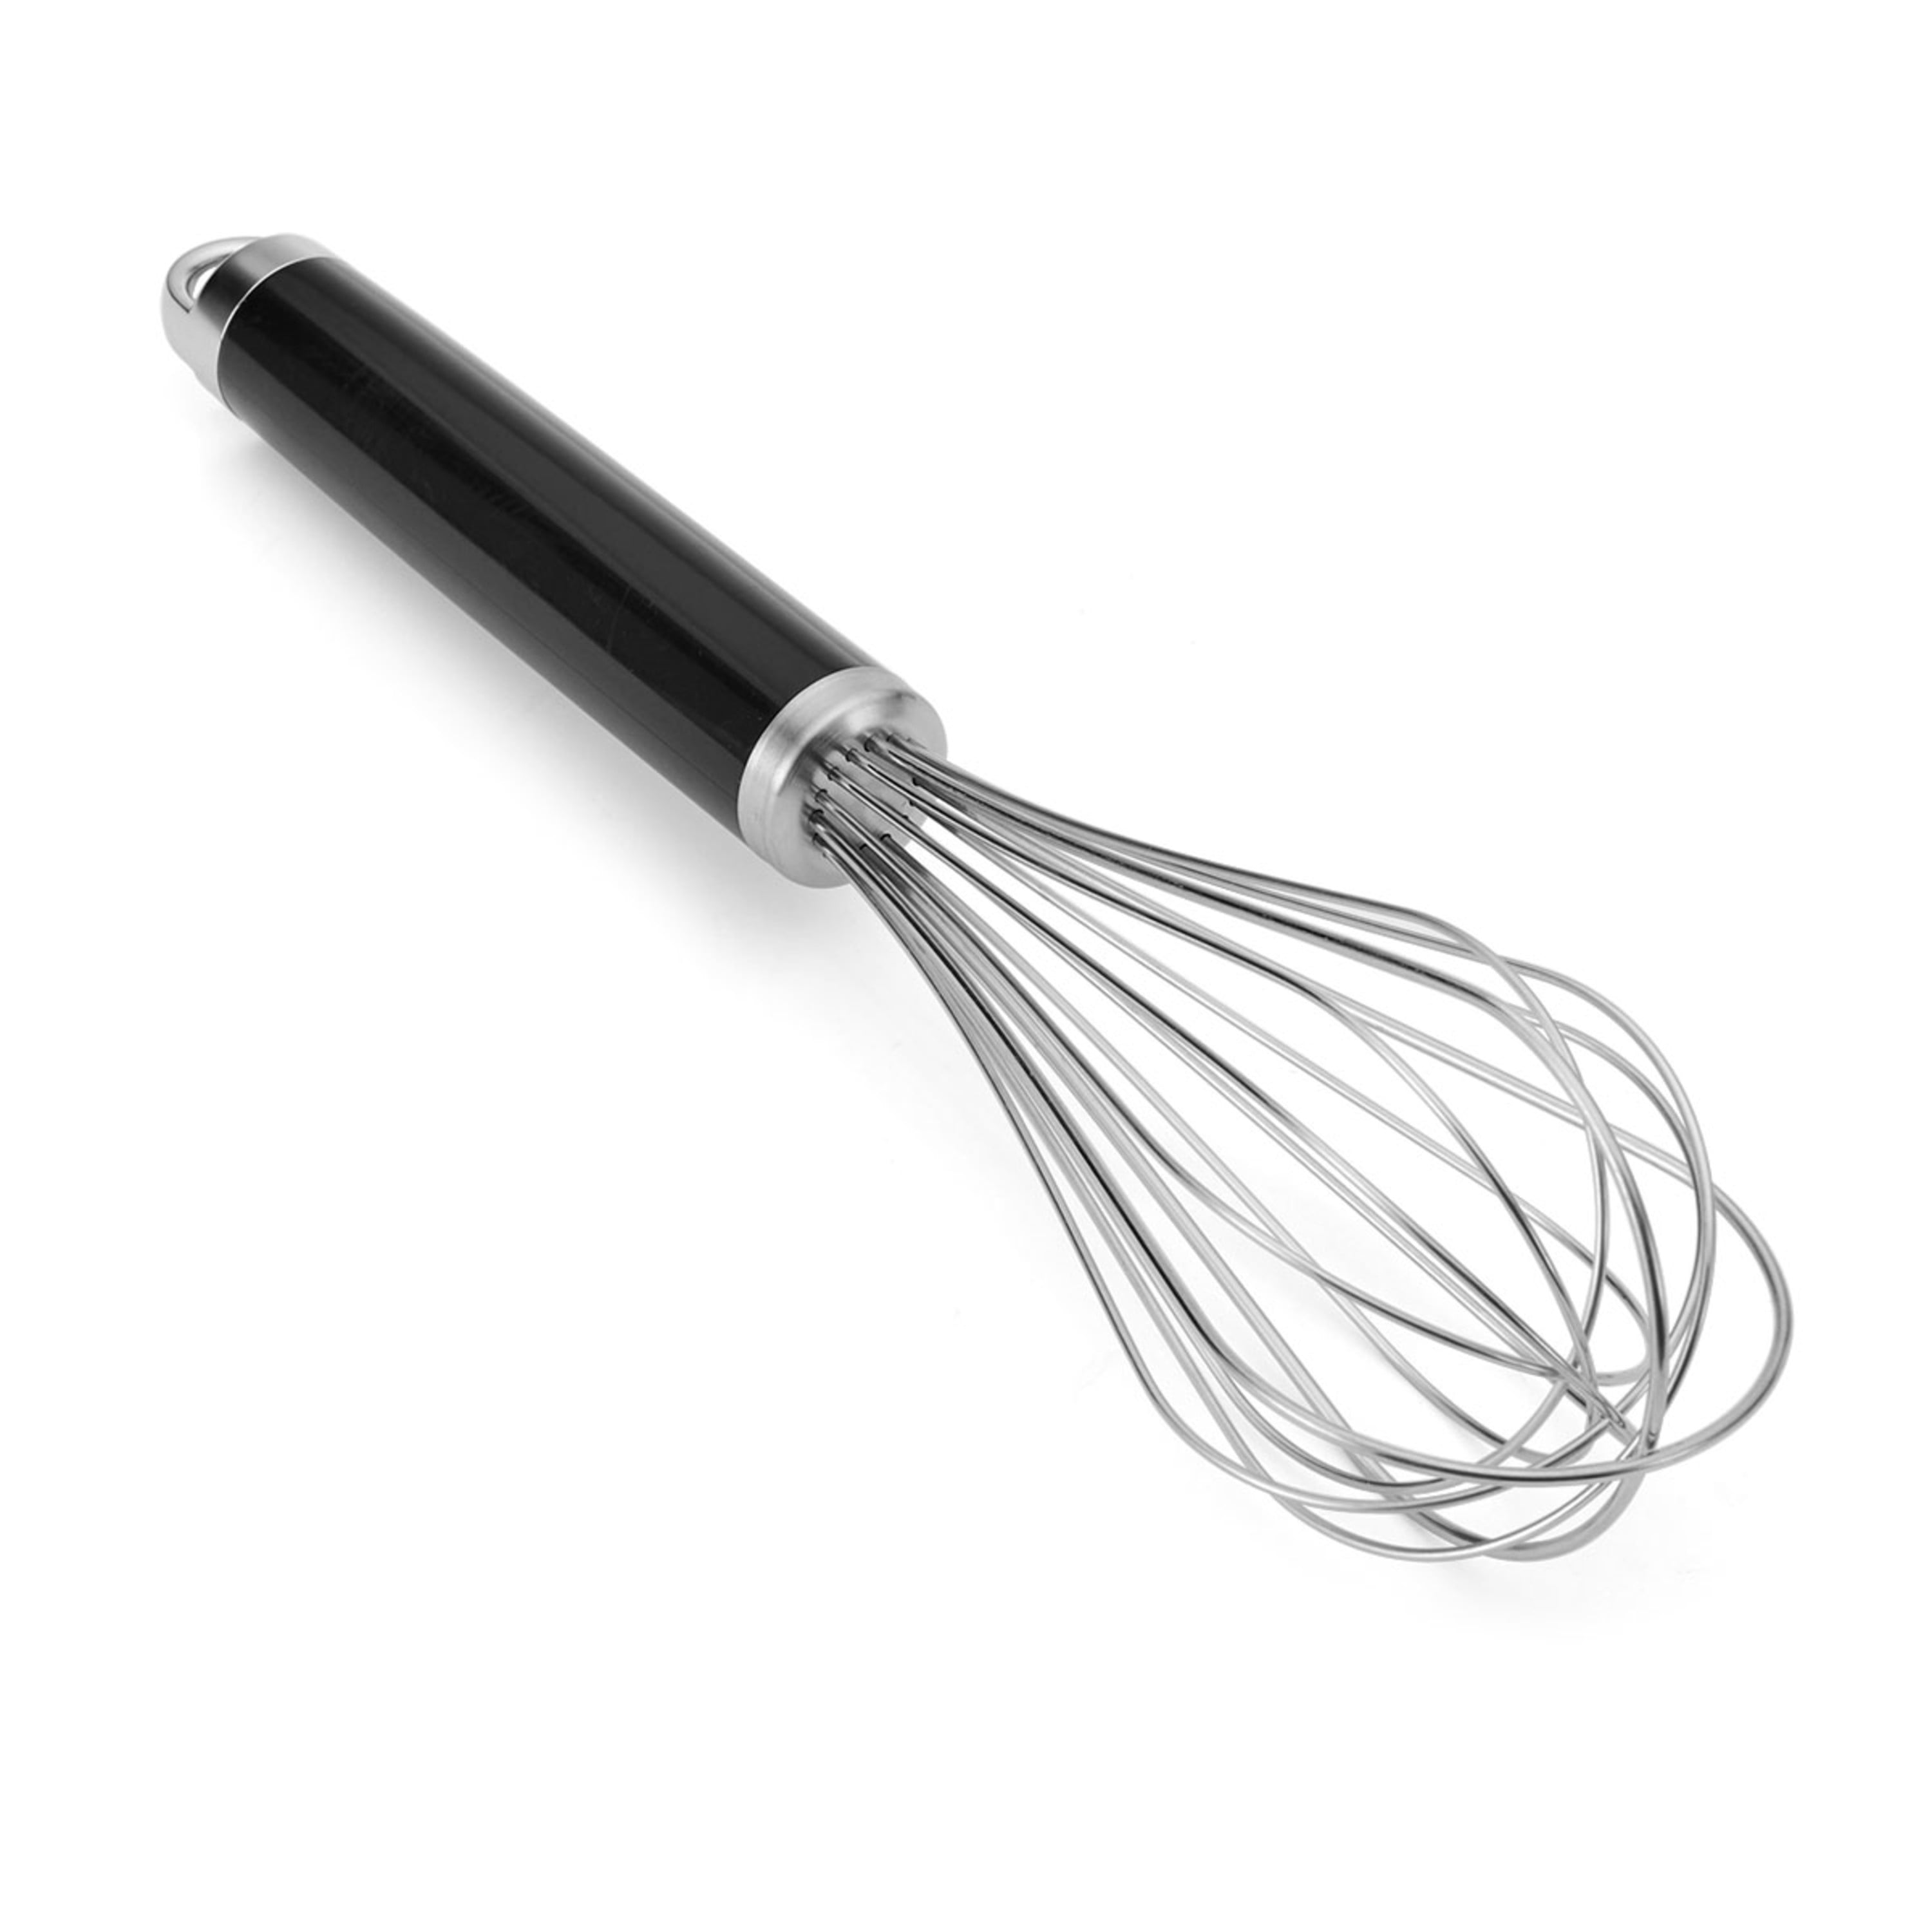  Whisk Wiper - Wipe a Whisk Easily - Multipurpose Kitchen Tool,  Made In USA - Includes 11 Stainless-Steel Whisk - Cool Baking Gadget, A  Great Gift For Men and Women (Color